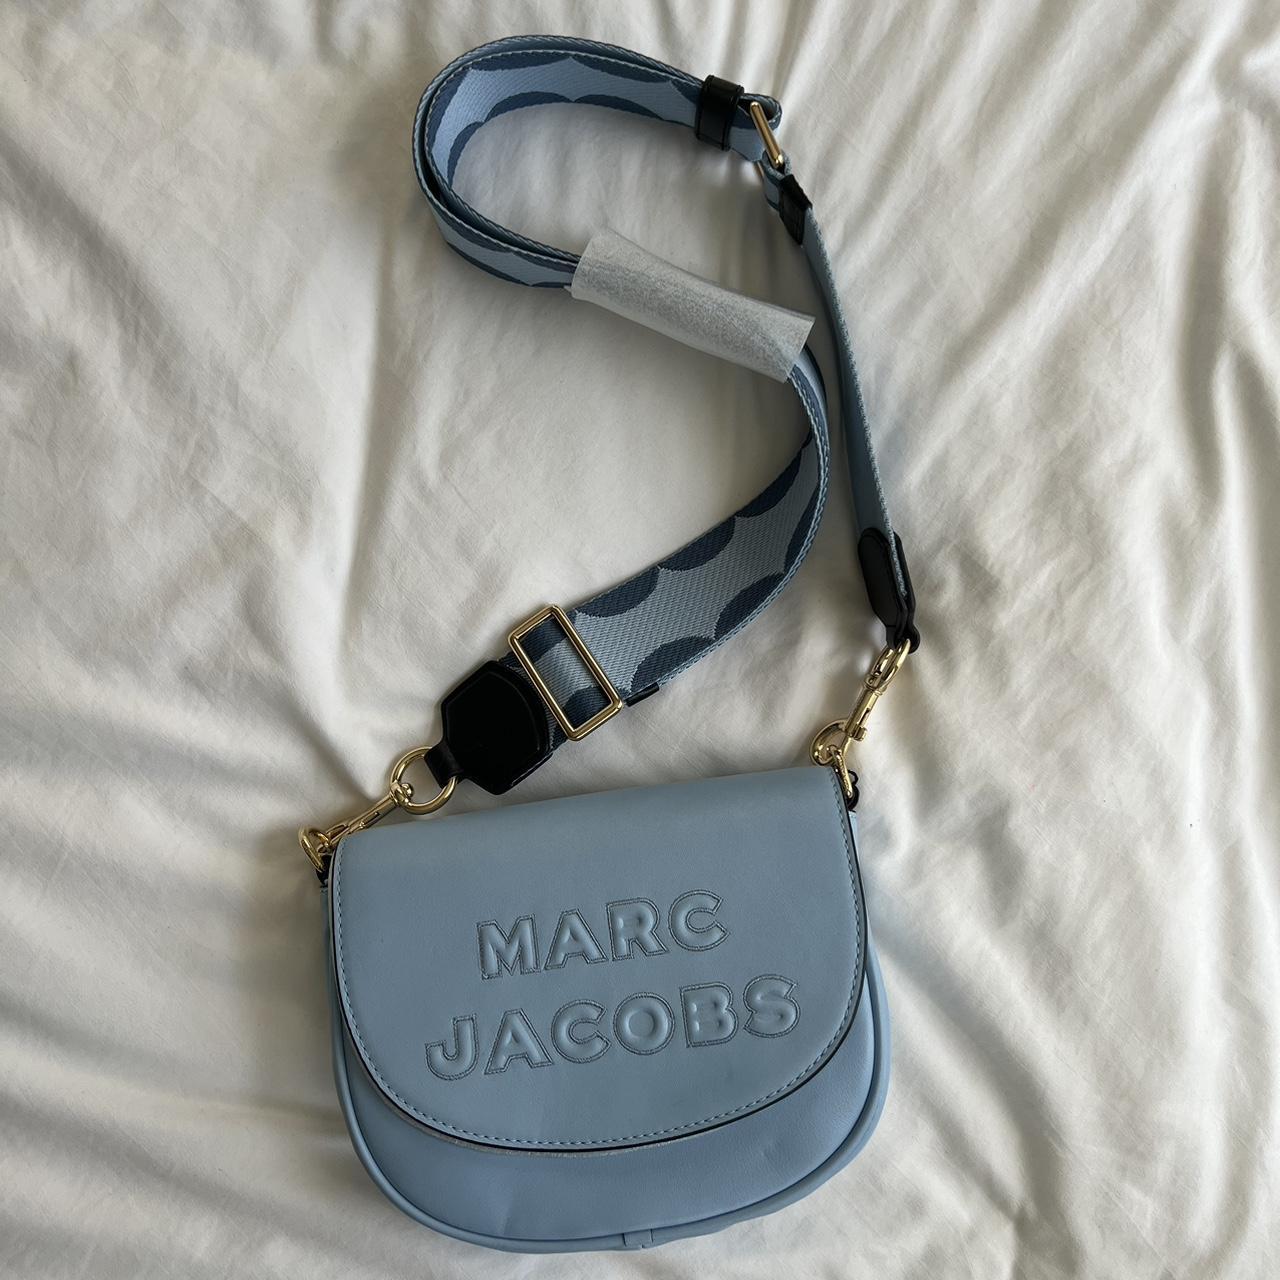 cutest lil marc by marc jacobs clutch perf condition - Depop